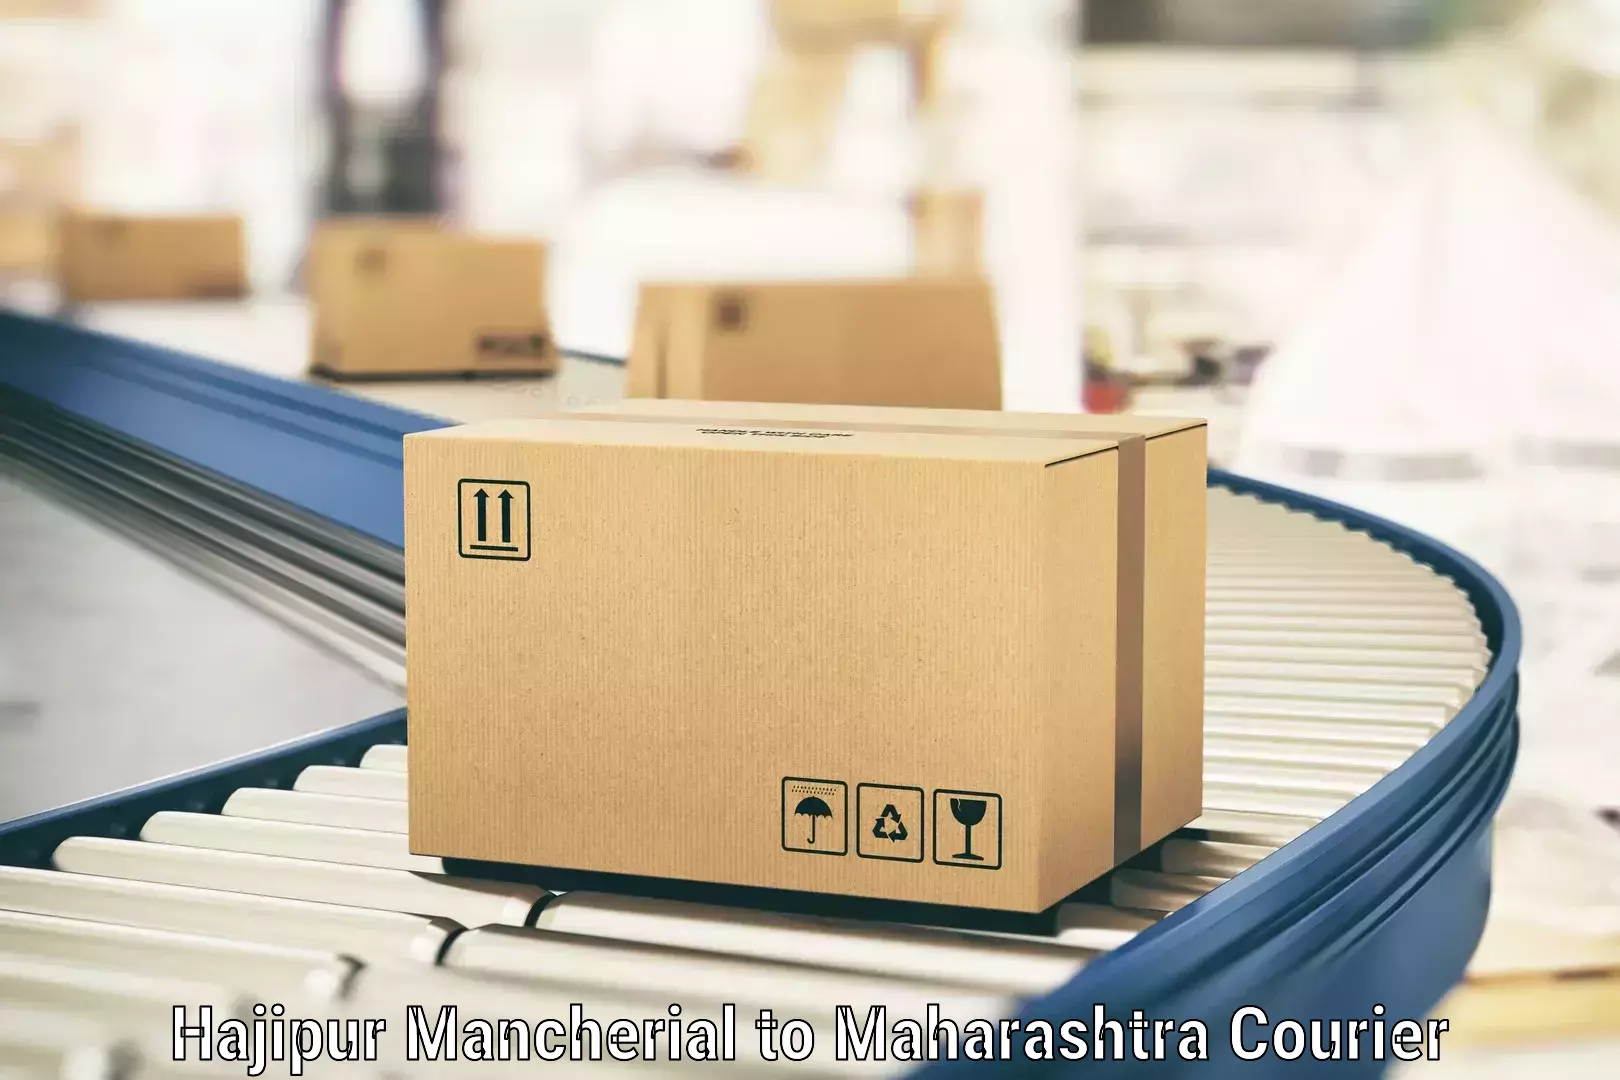 Efficient cargo services Hajipur Mancherial to Dharmabad